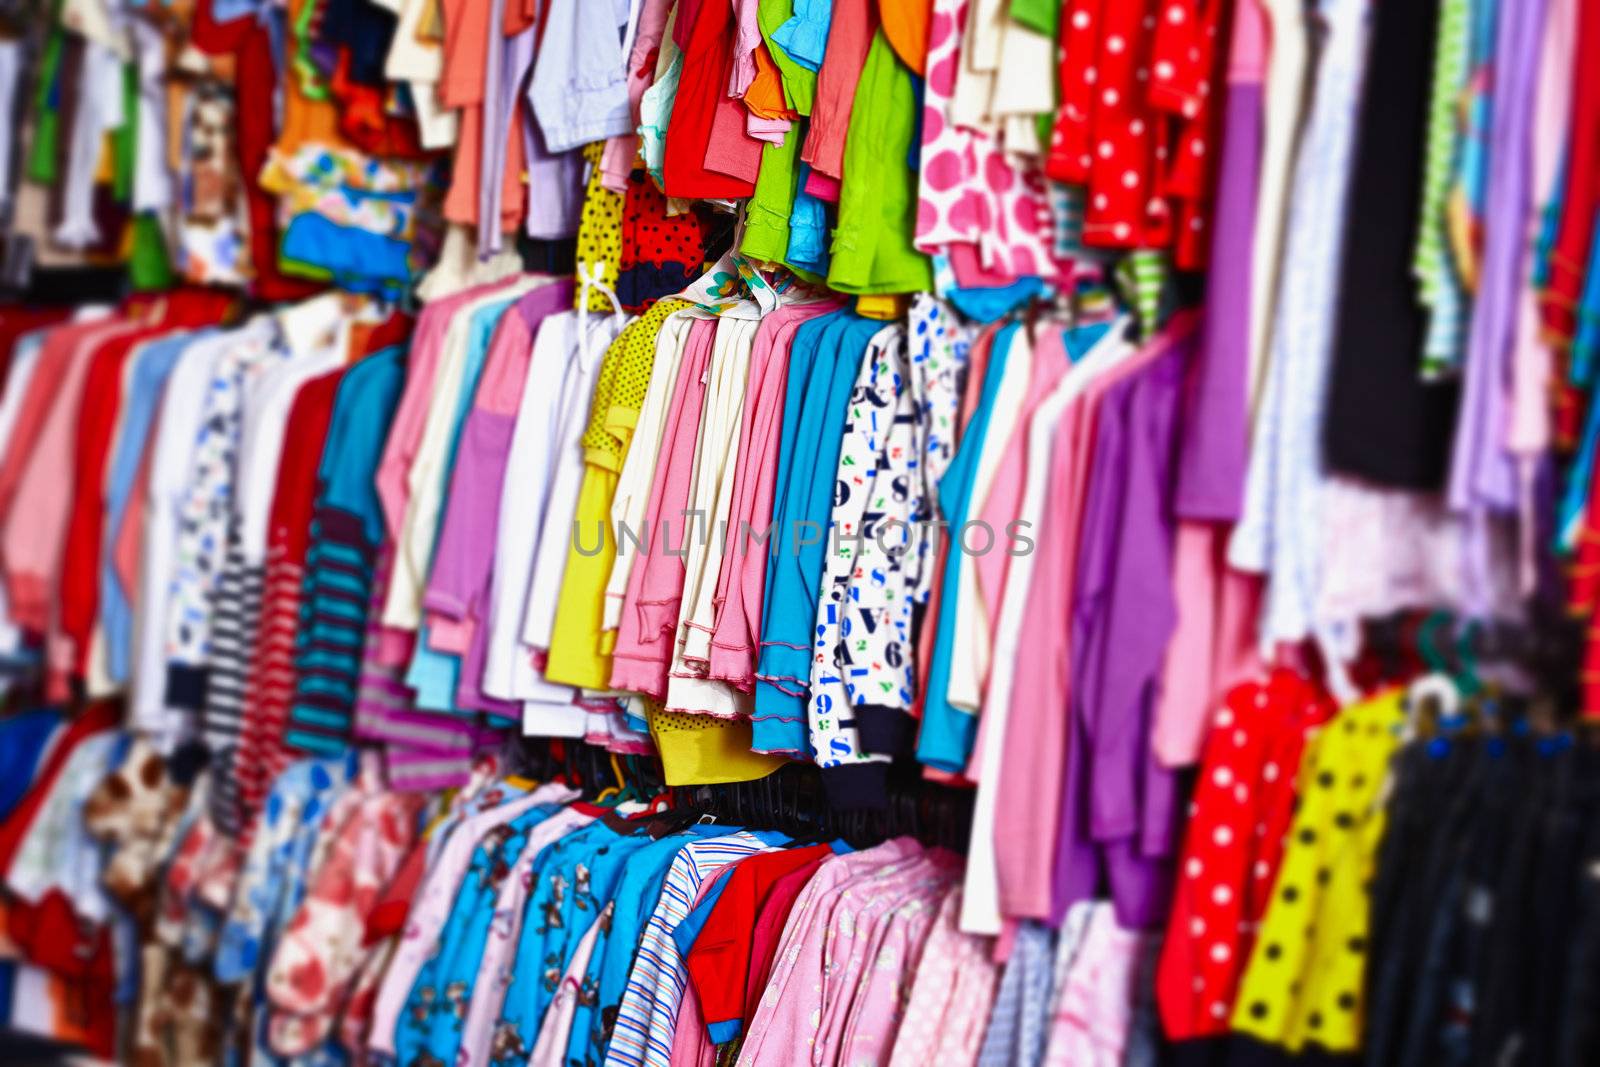 Colorful baby clothes hanging on hangers in a store